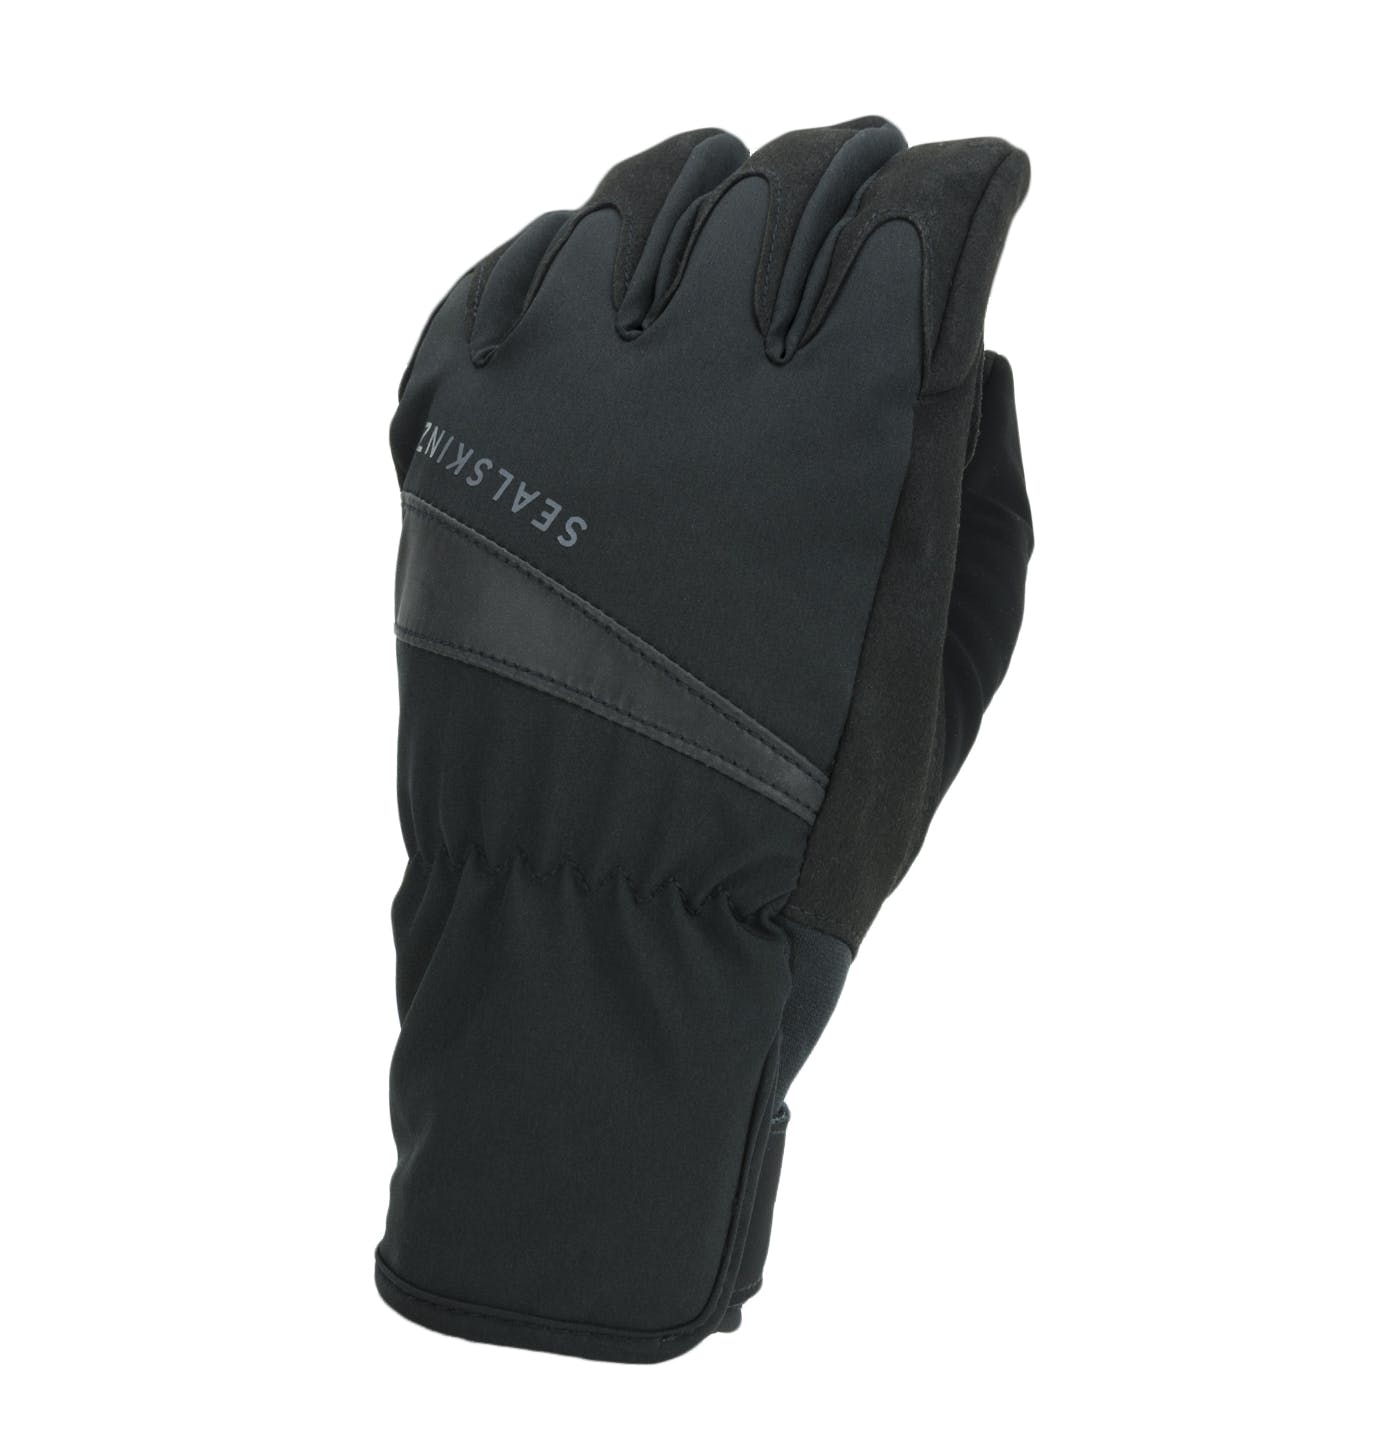 Stealth Heated Glove Liners - 6 hours of Heat | Battery and Charger Included